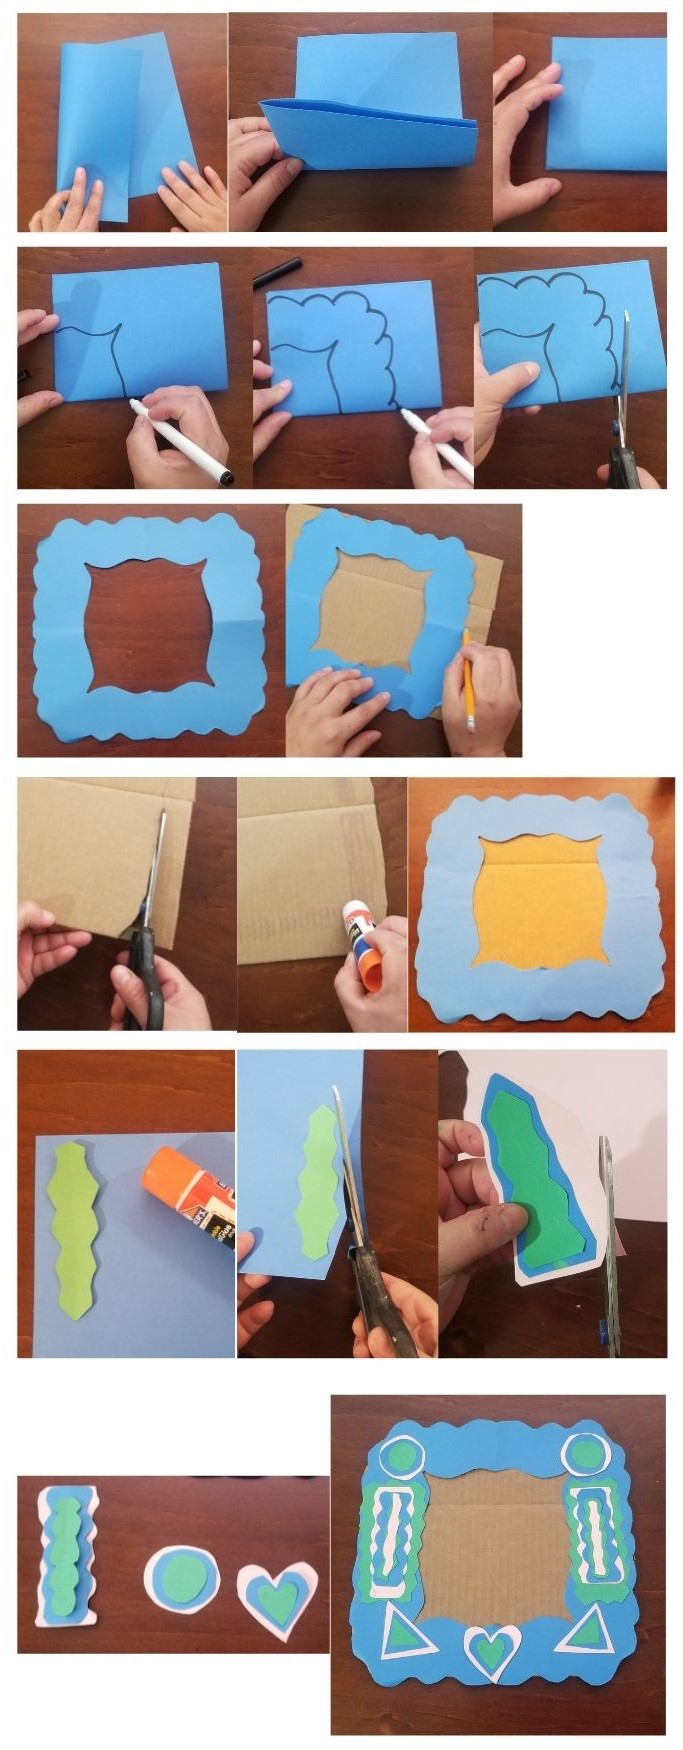 A grouping of images that showing the steps of how to make a frame in the tramp art style using construction paper and cardboard. 